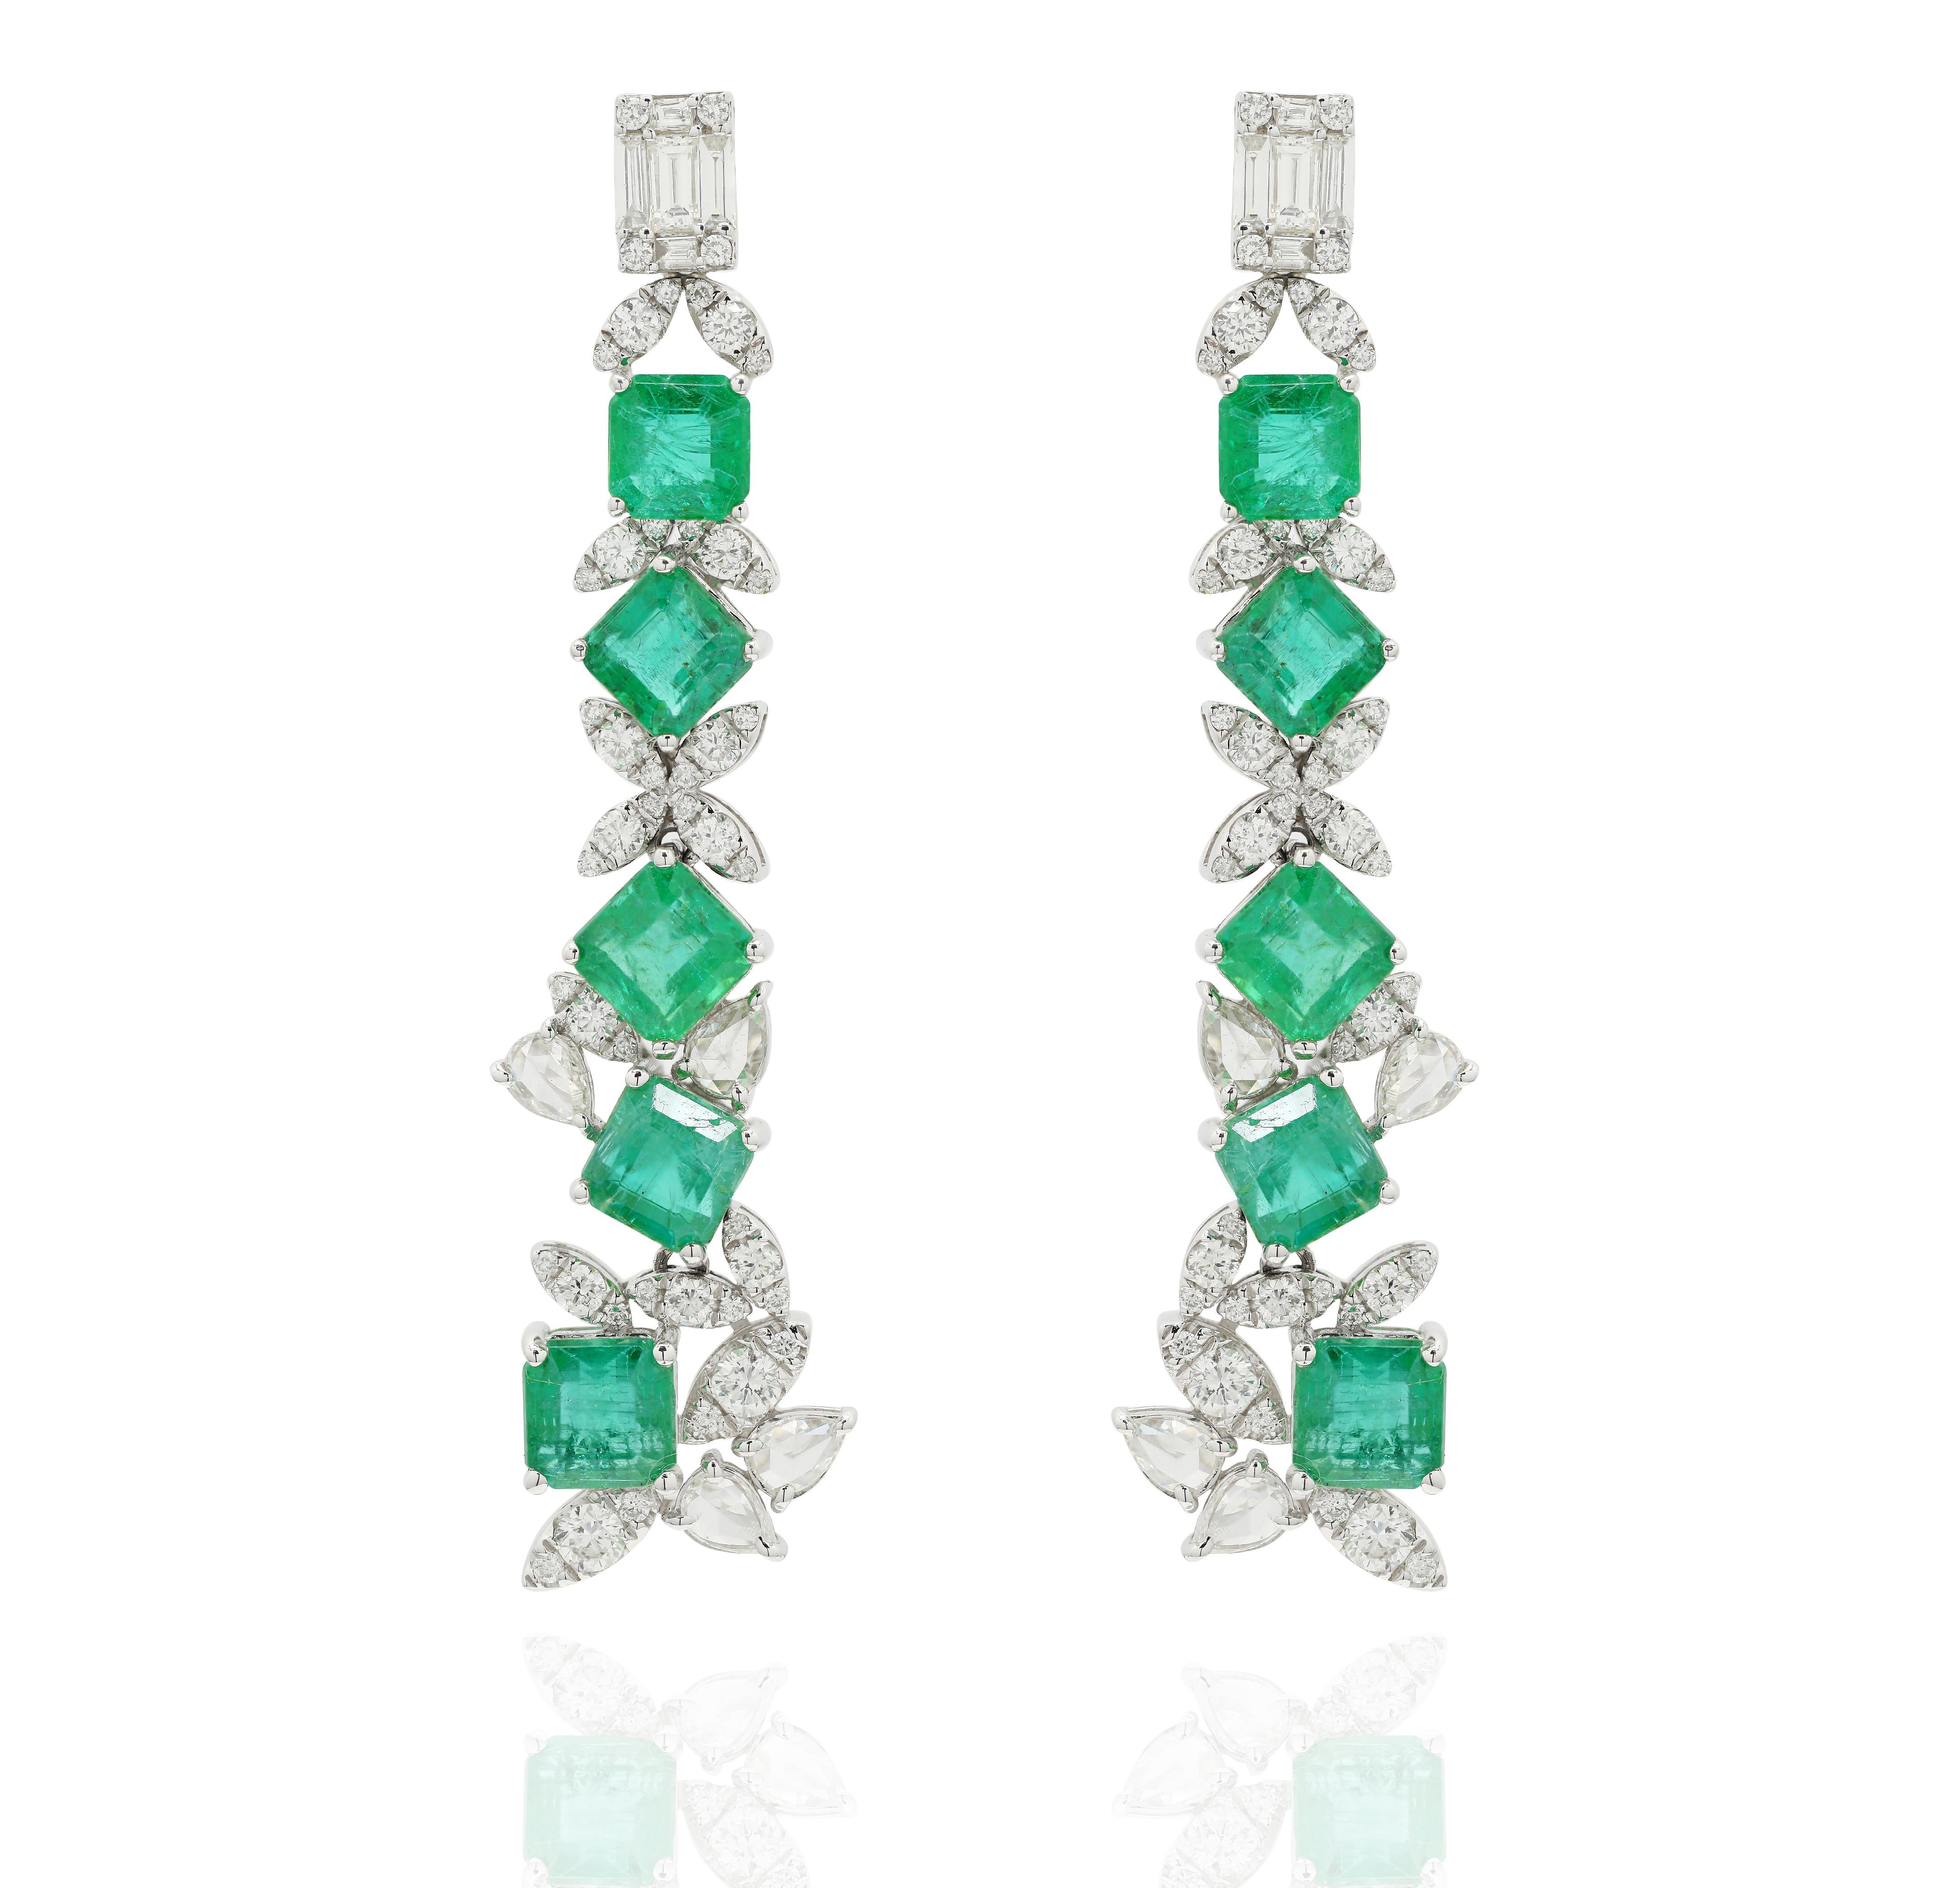 Designer Emerald and Diamond Long Dangle Earrings to make a statement with your look. These earrings create a sparkling, luxurious look featuring square cut gemstone.
If you love to gravitate towards unique styles, this piece of jewelry is perfect